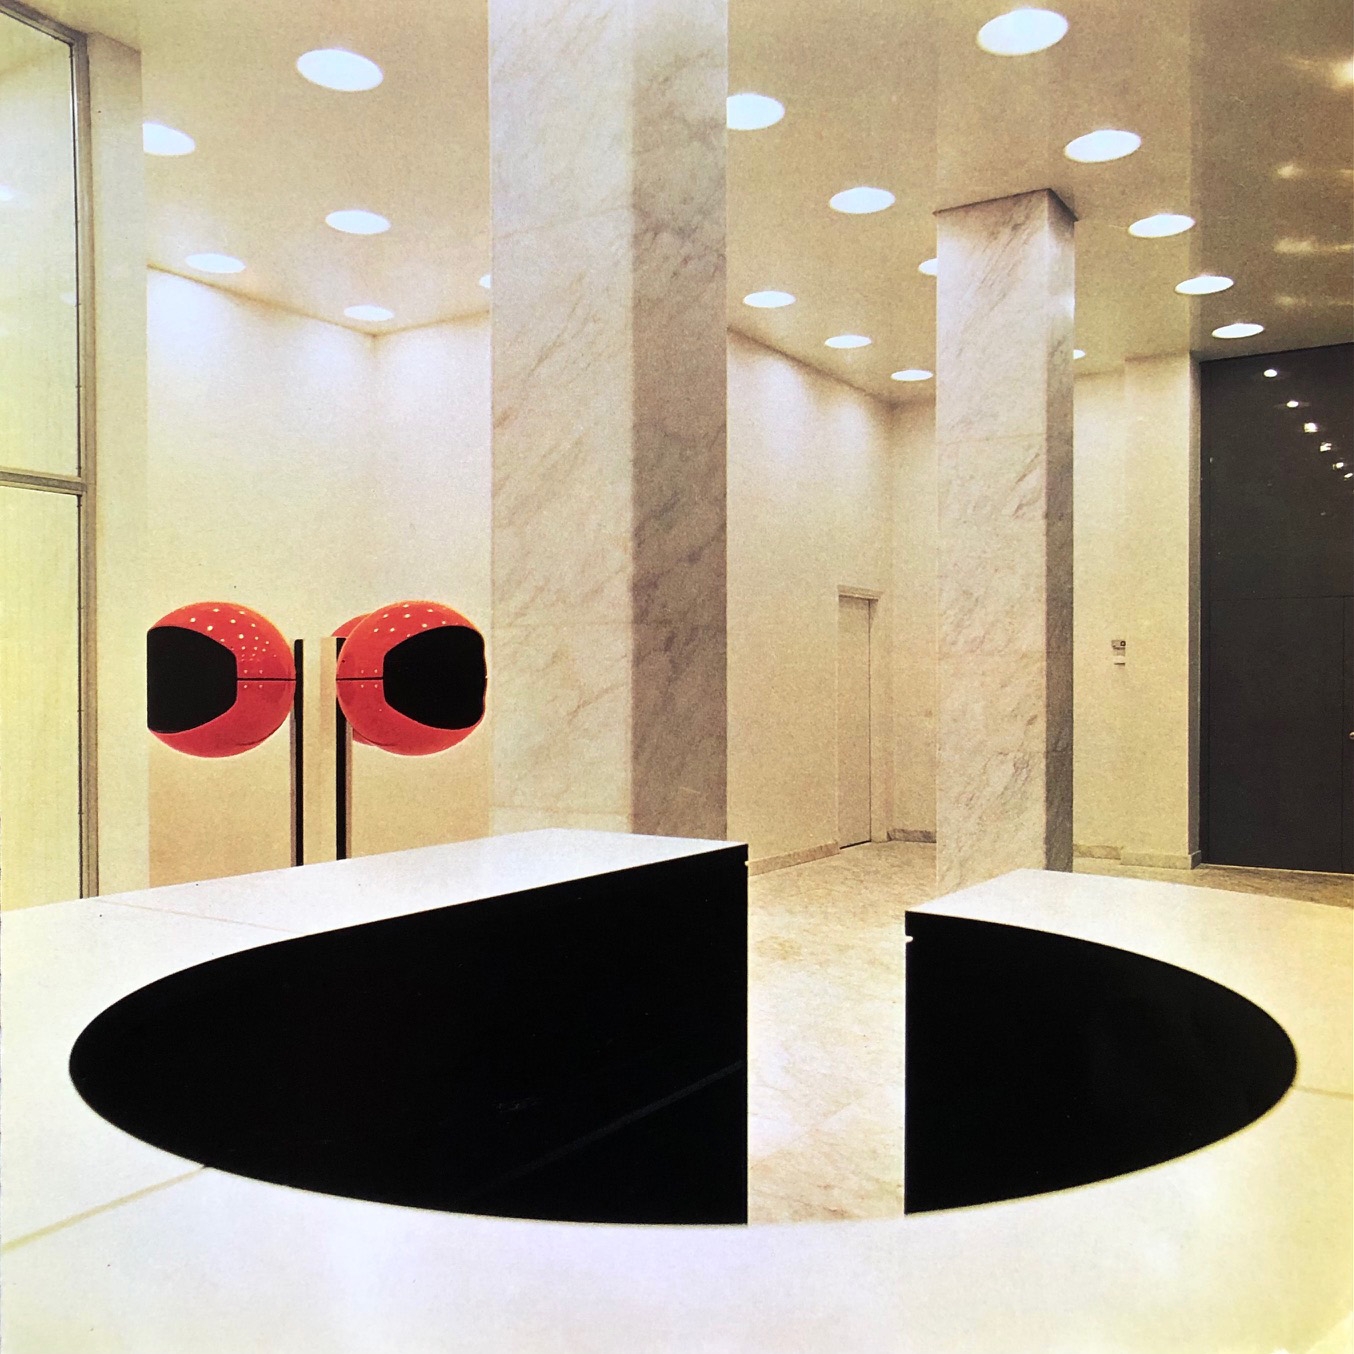 Lobby with reception desk and red telephone cabinets designed by Andr&eacute; Monpoix and Alain Richard.